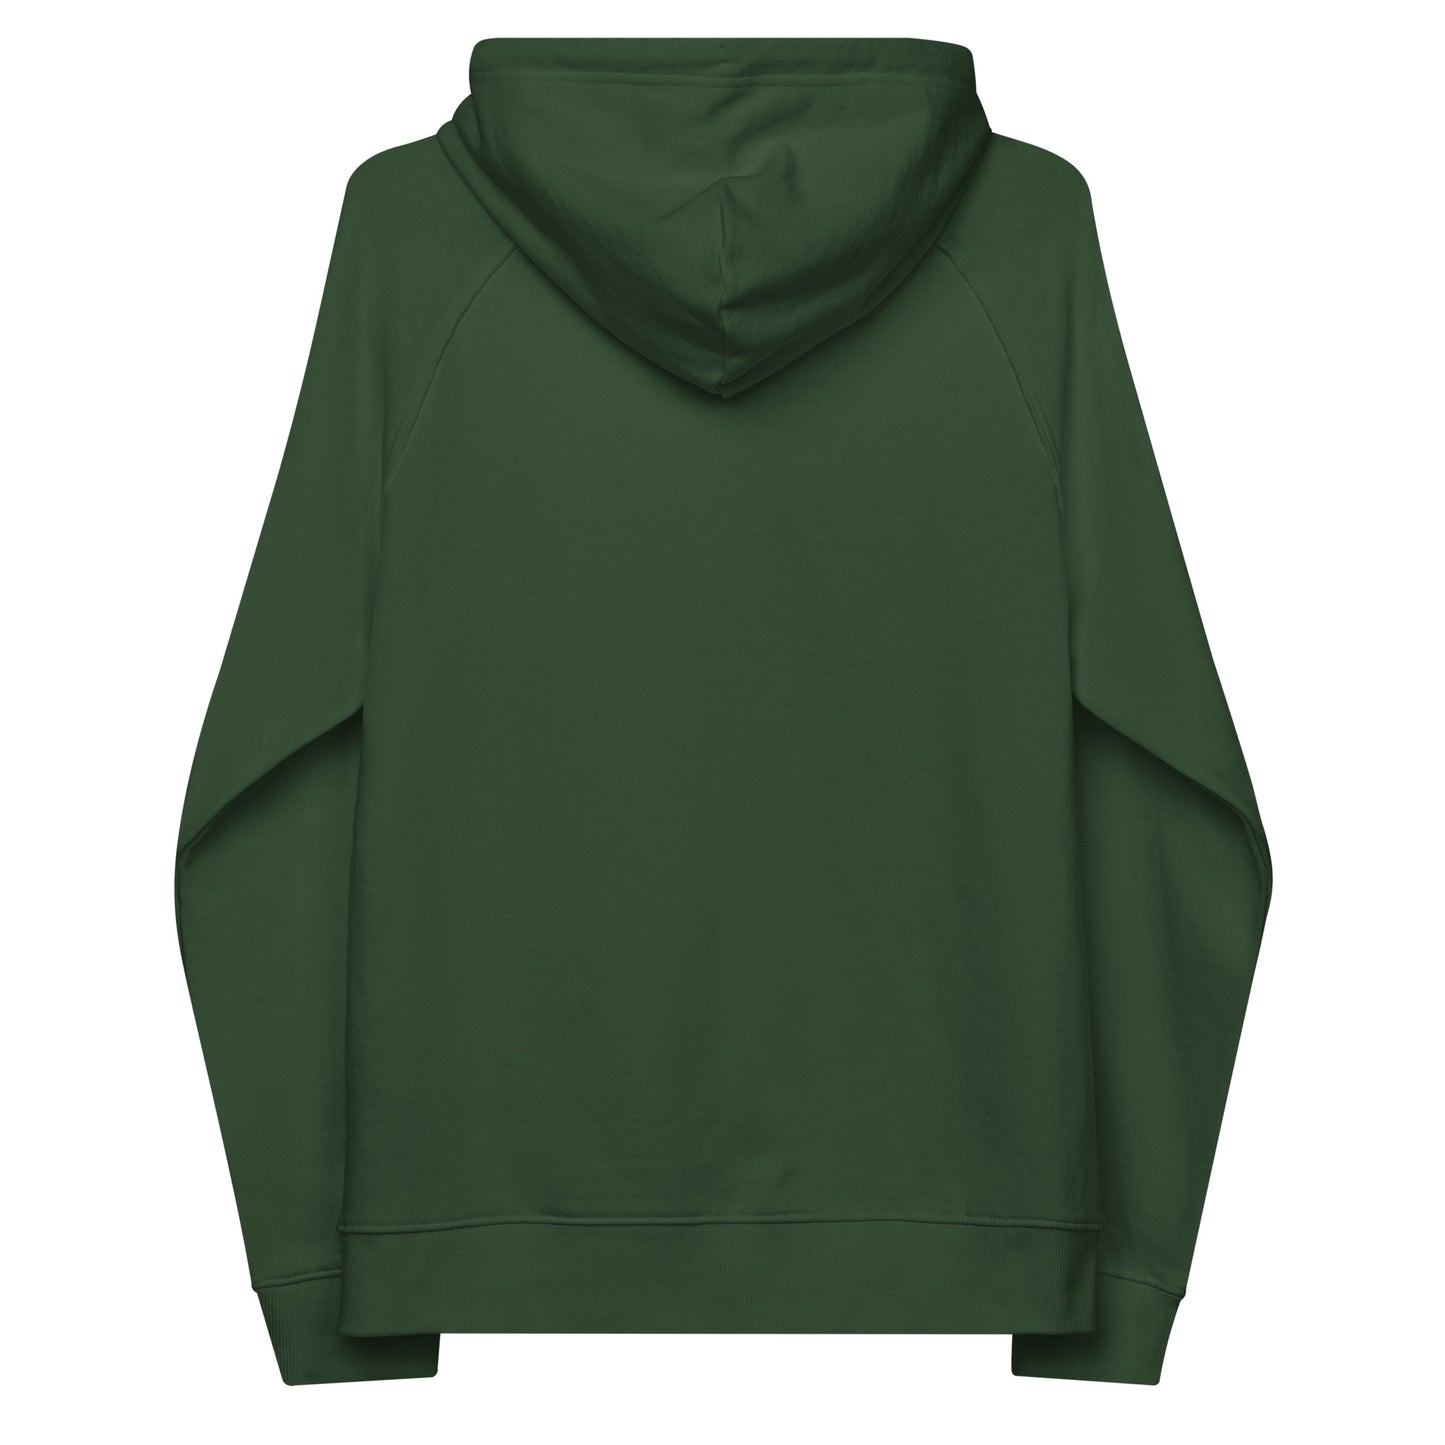 City Organic Hoodie - Old Gold • AKL Auckland • YHM Designs - Image 09